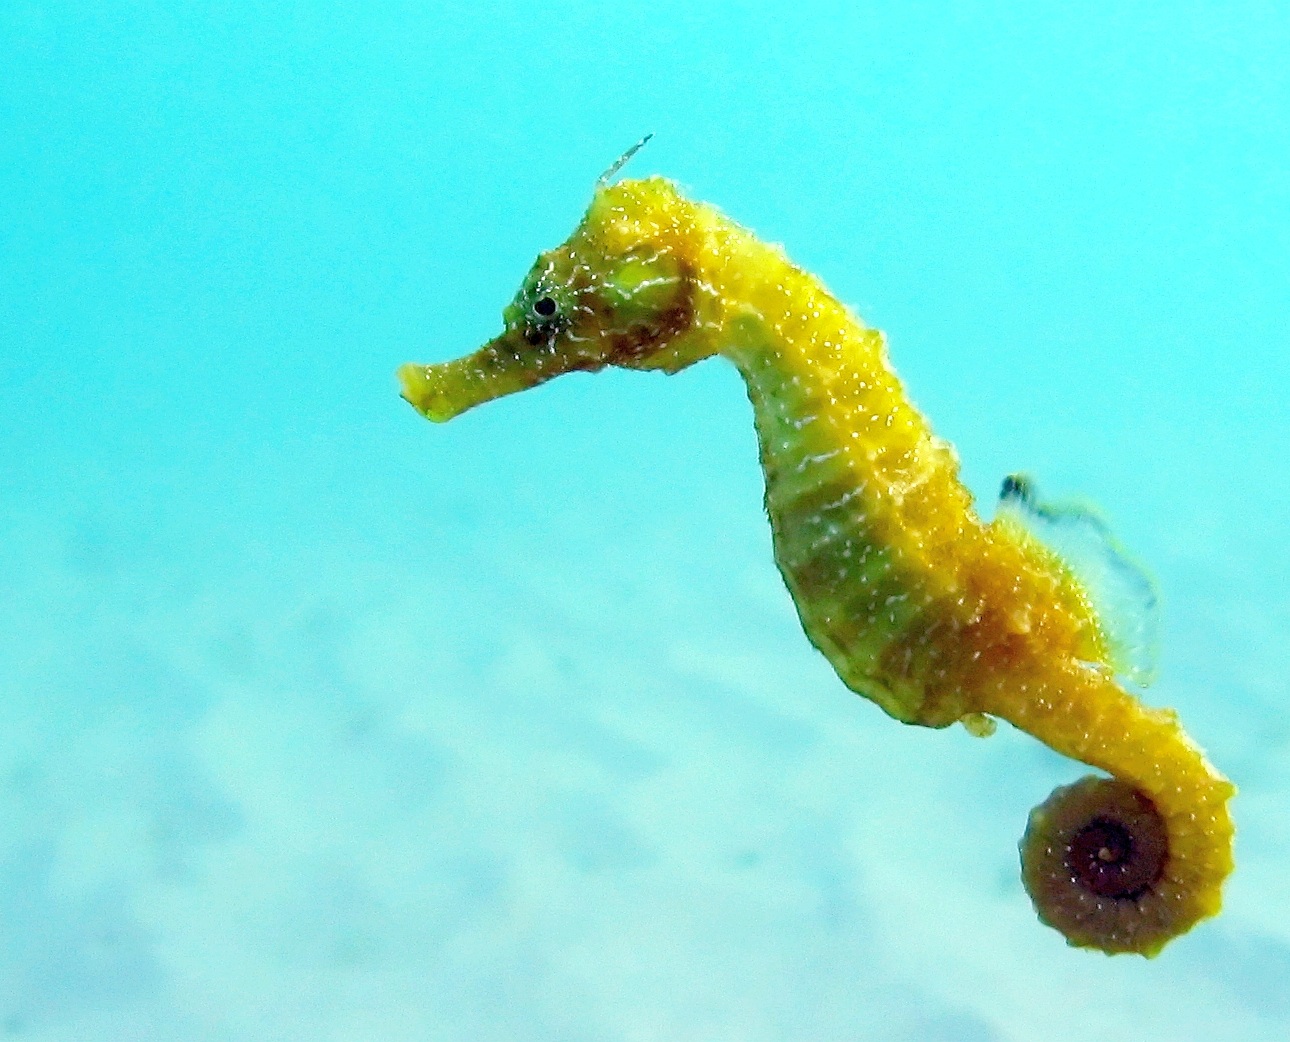 Facts About Seahorses